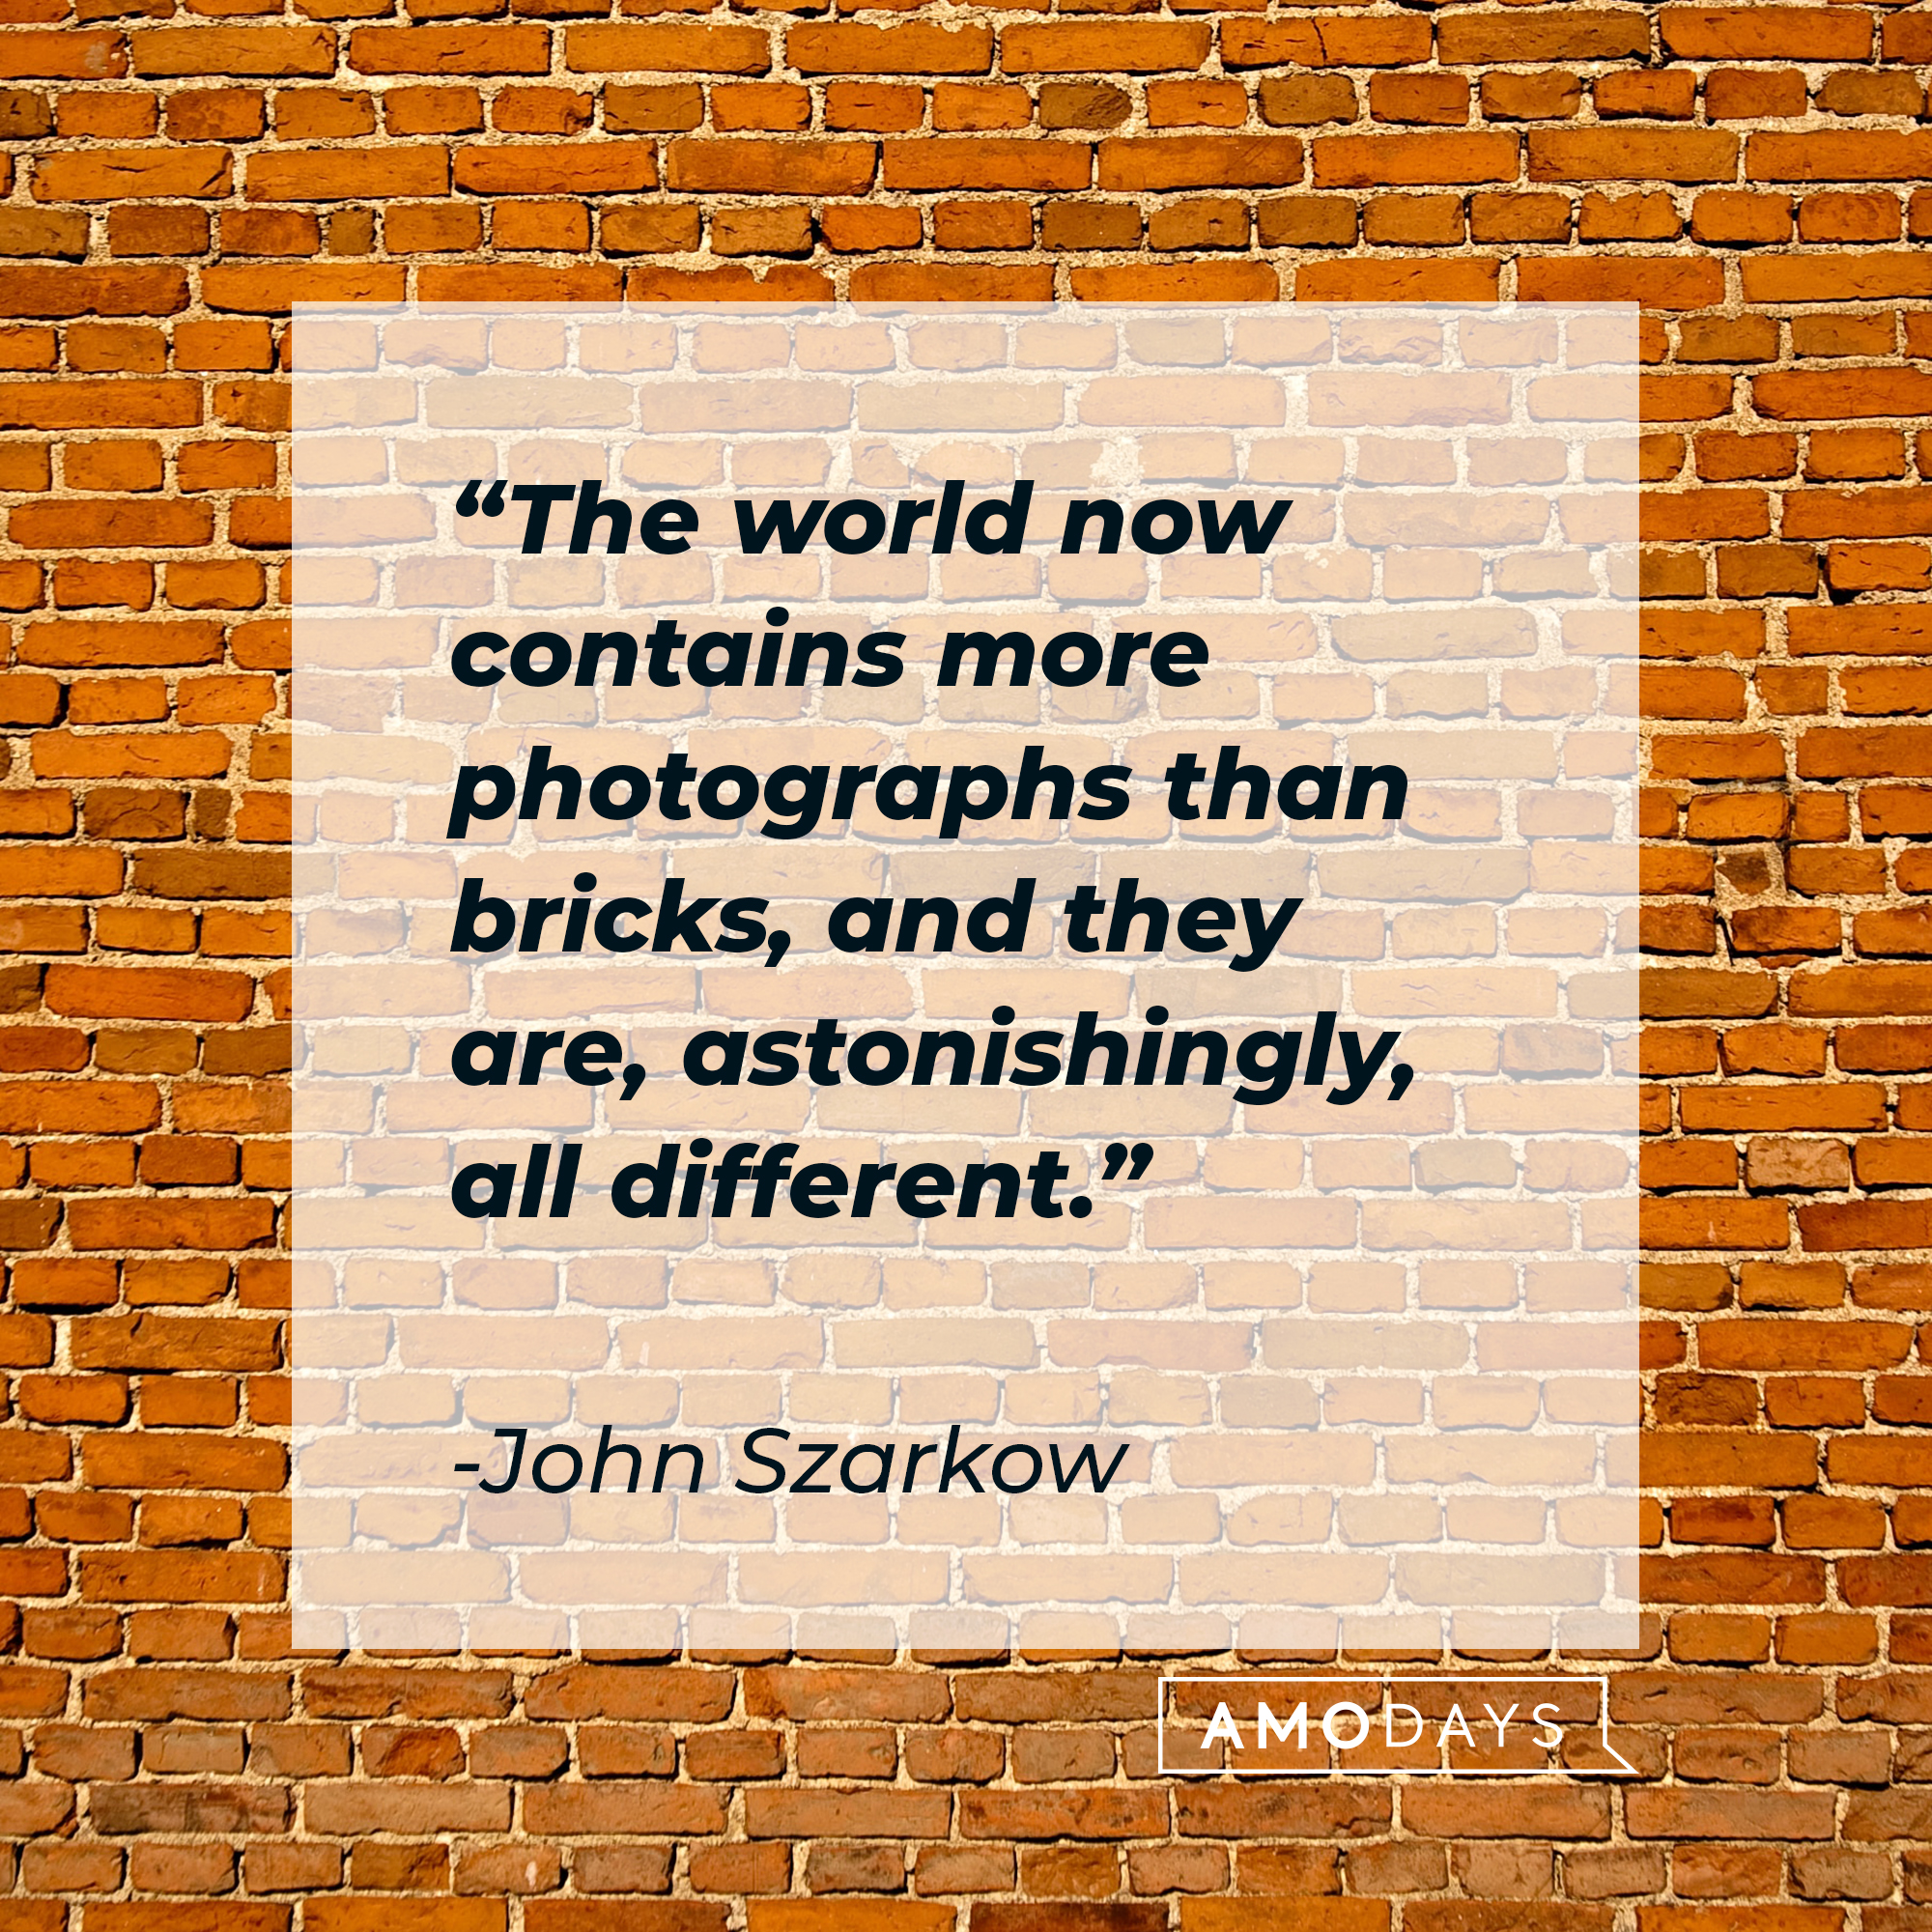 John Szarkow's quote: "The world now contains more photographs than bricks, and they are, astonishingly, all different." | Source: Unsplash